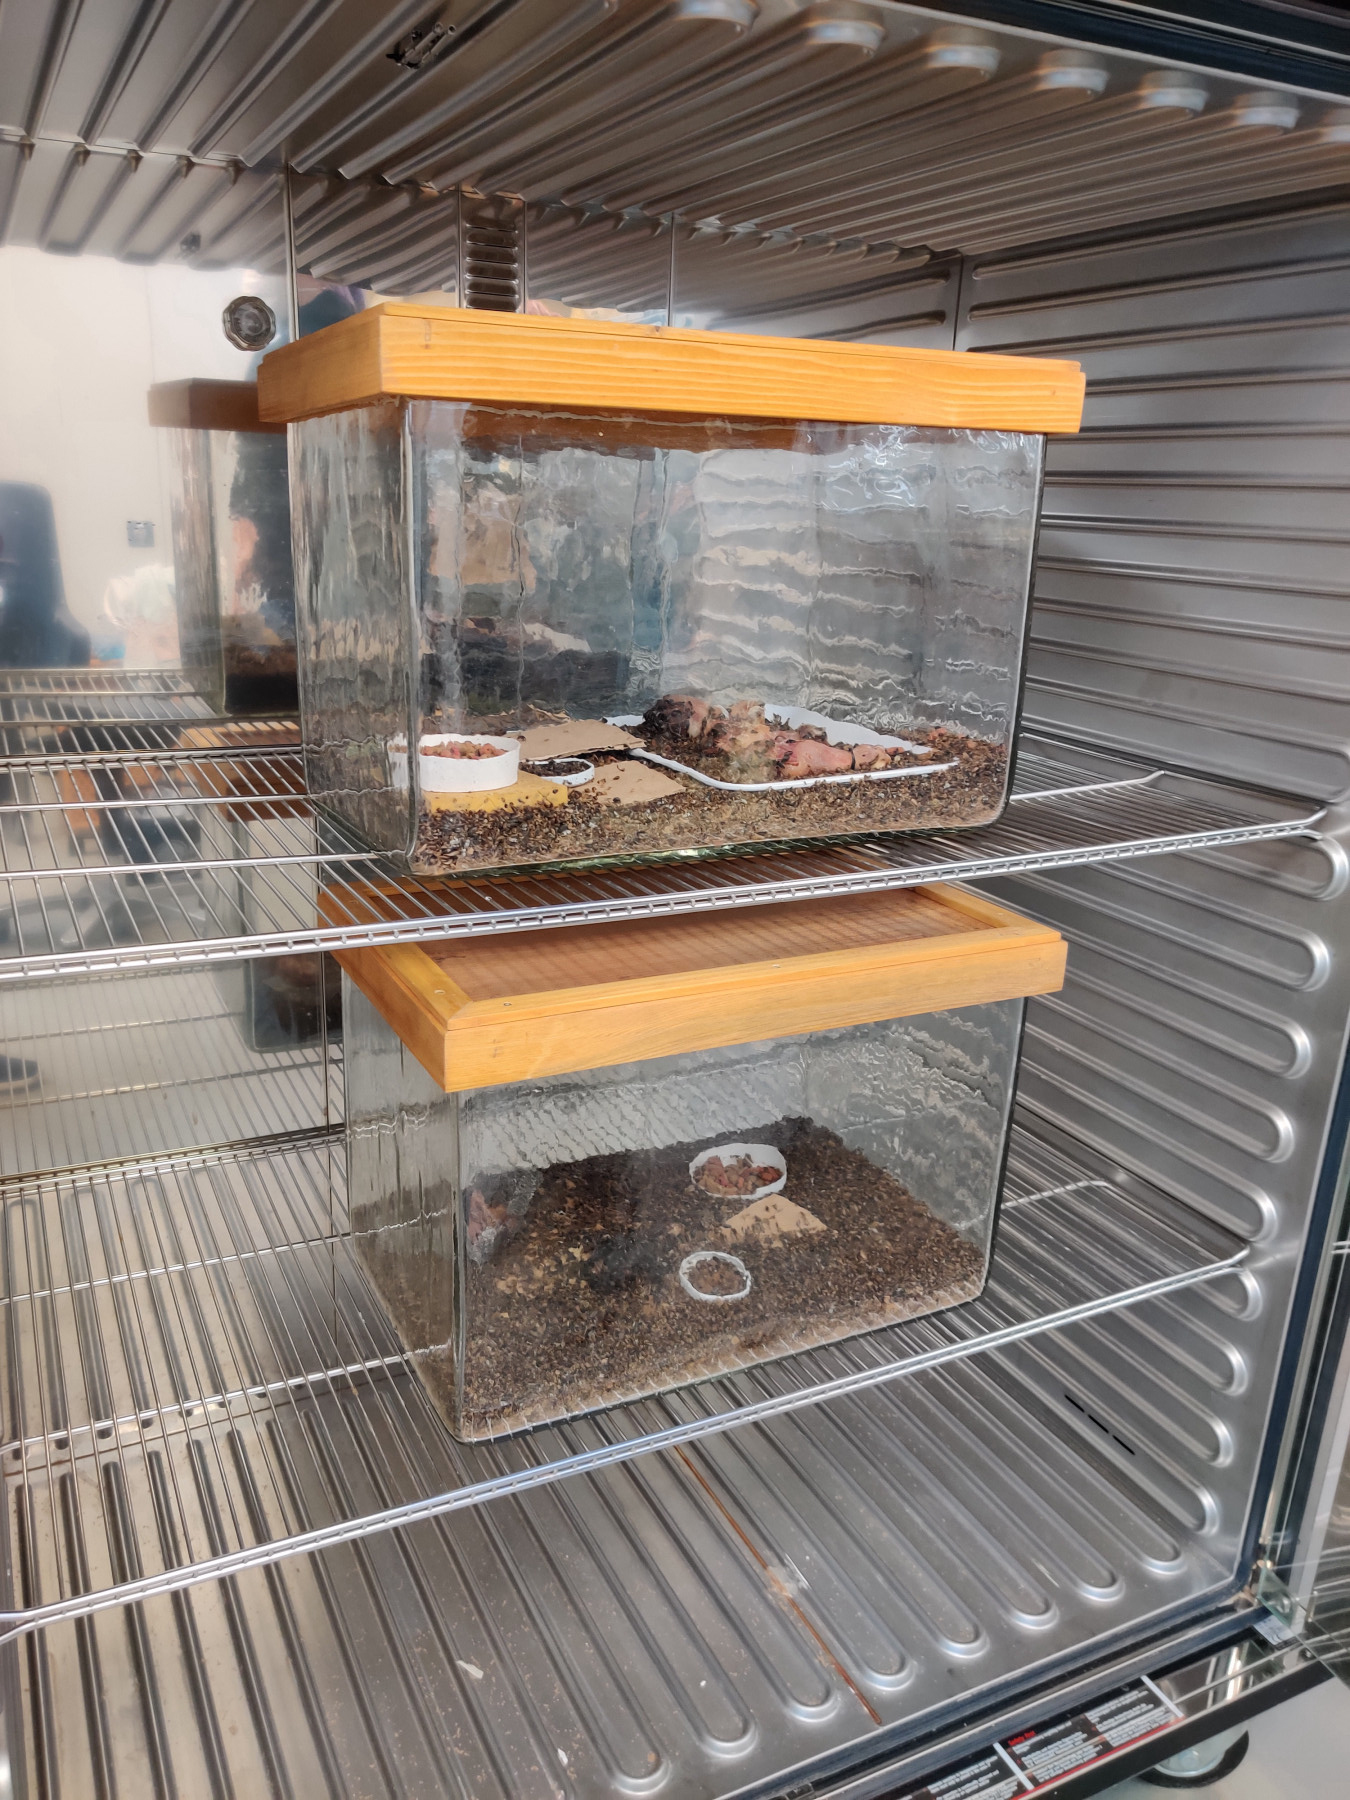 View of a metal cabinet with two racks onto which glass tanks with closed wooden lids have been placed. There are various bowls and trays with pieces of tissue in and on them inside the tanks. The floors of both tanks and the objects inside them are completely covered in beetles.